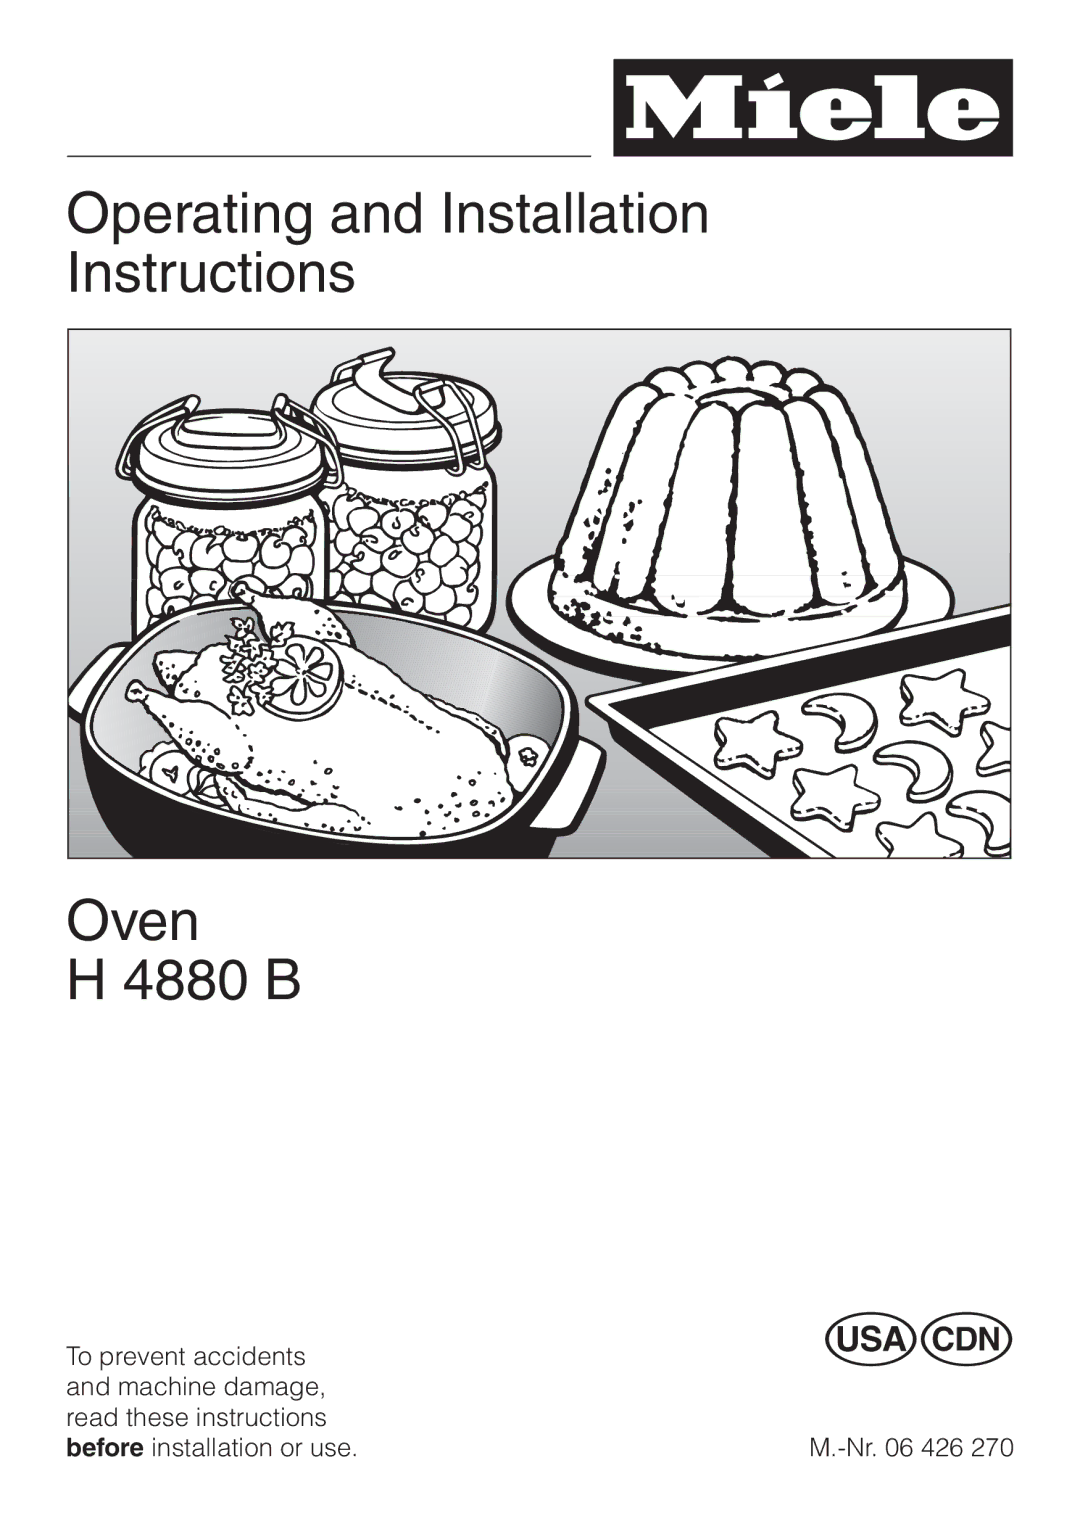 Miele H4880B installation instructions Operating and Installation Instructions Oven 4880 B 